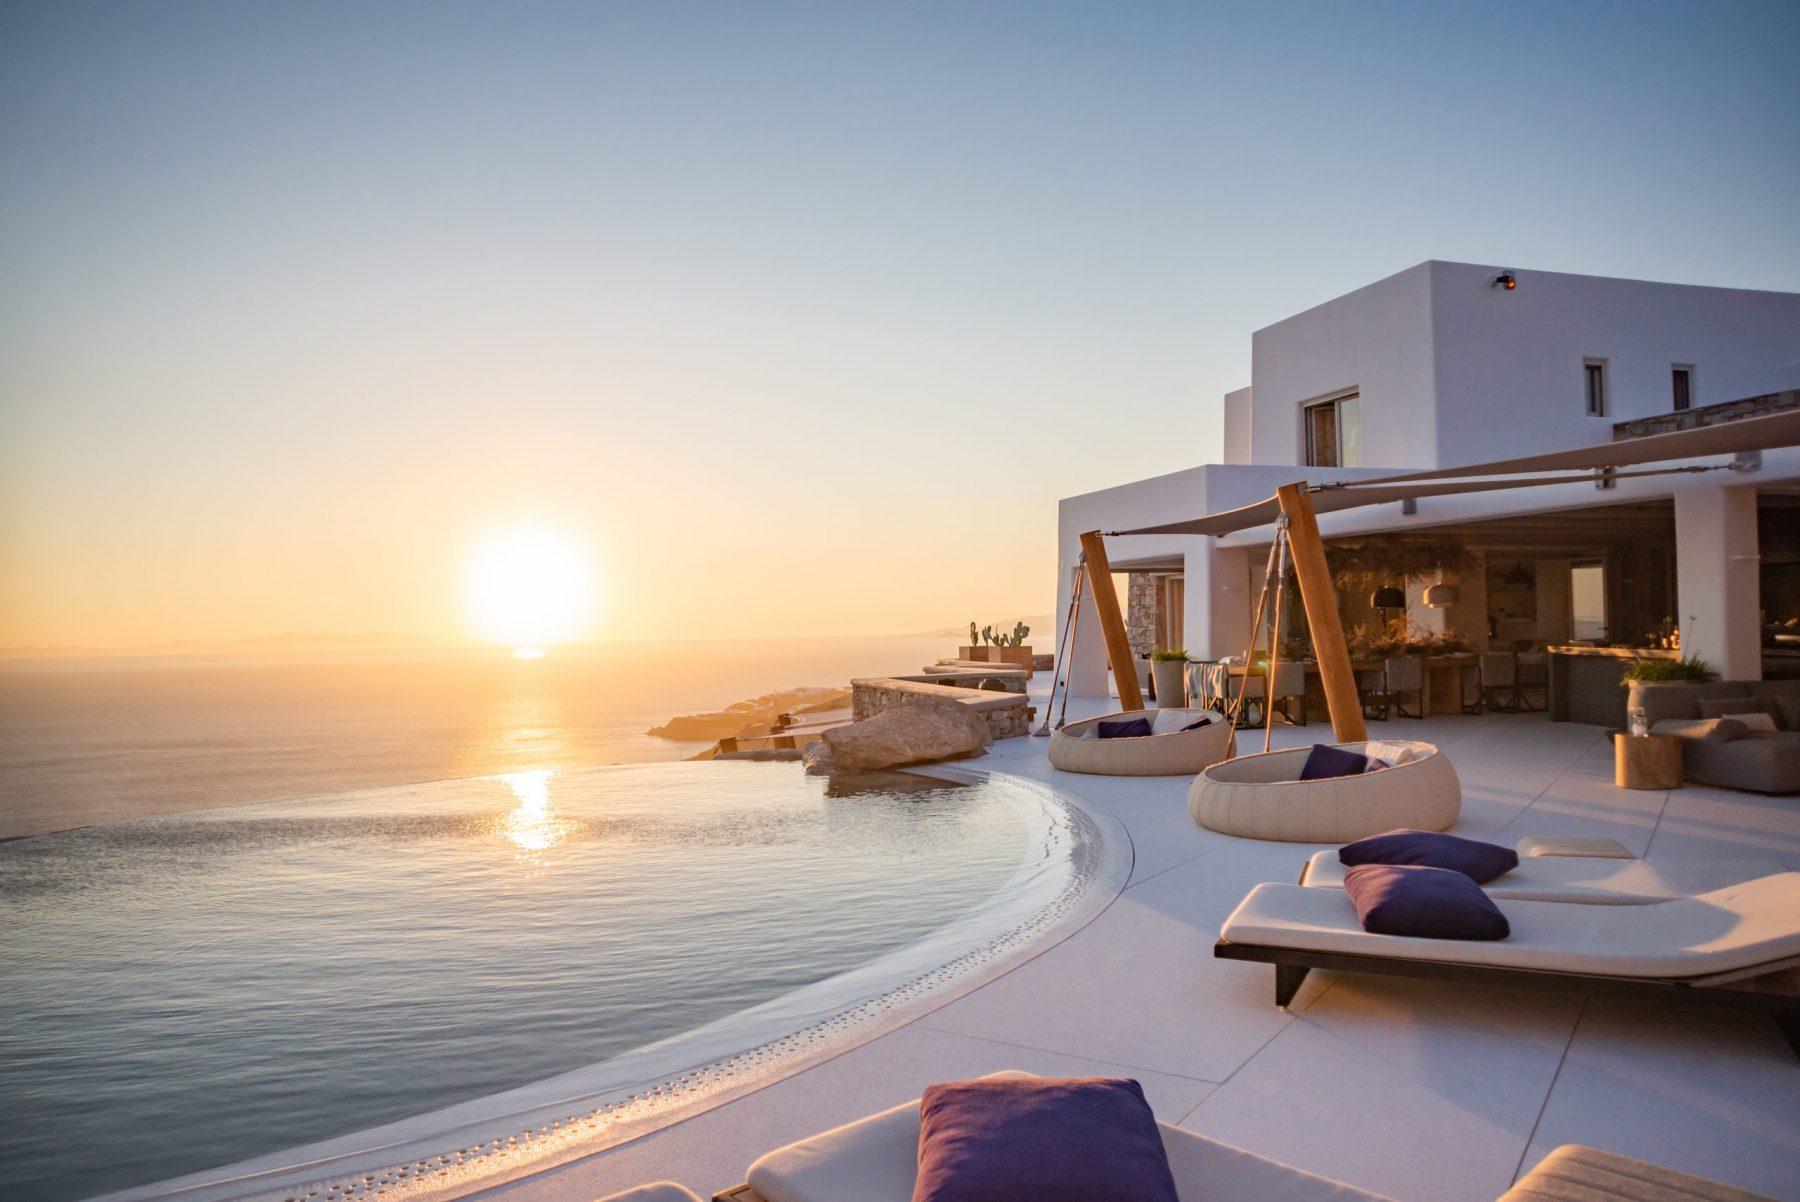 outside of the villa with breathtaking sunset and horizon view